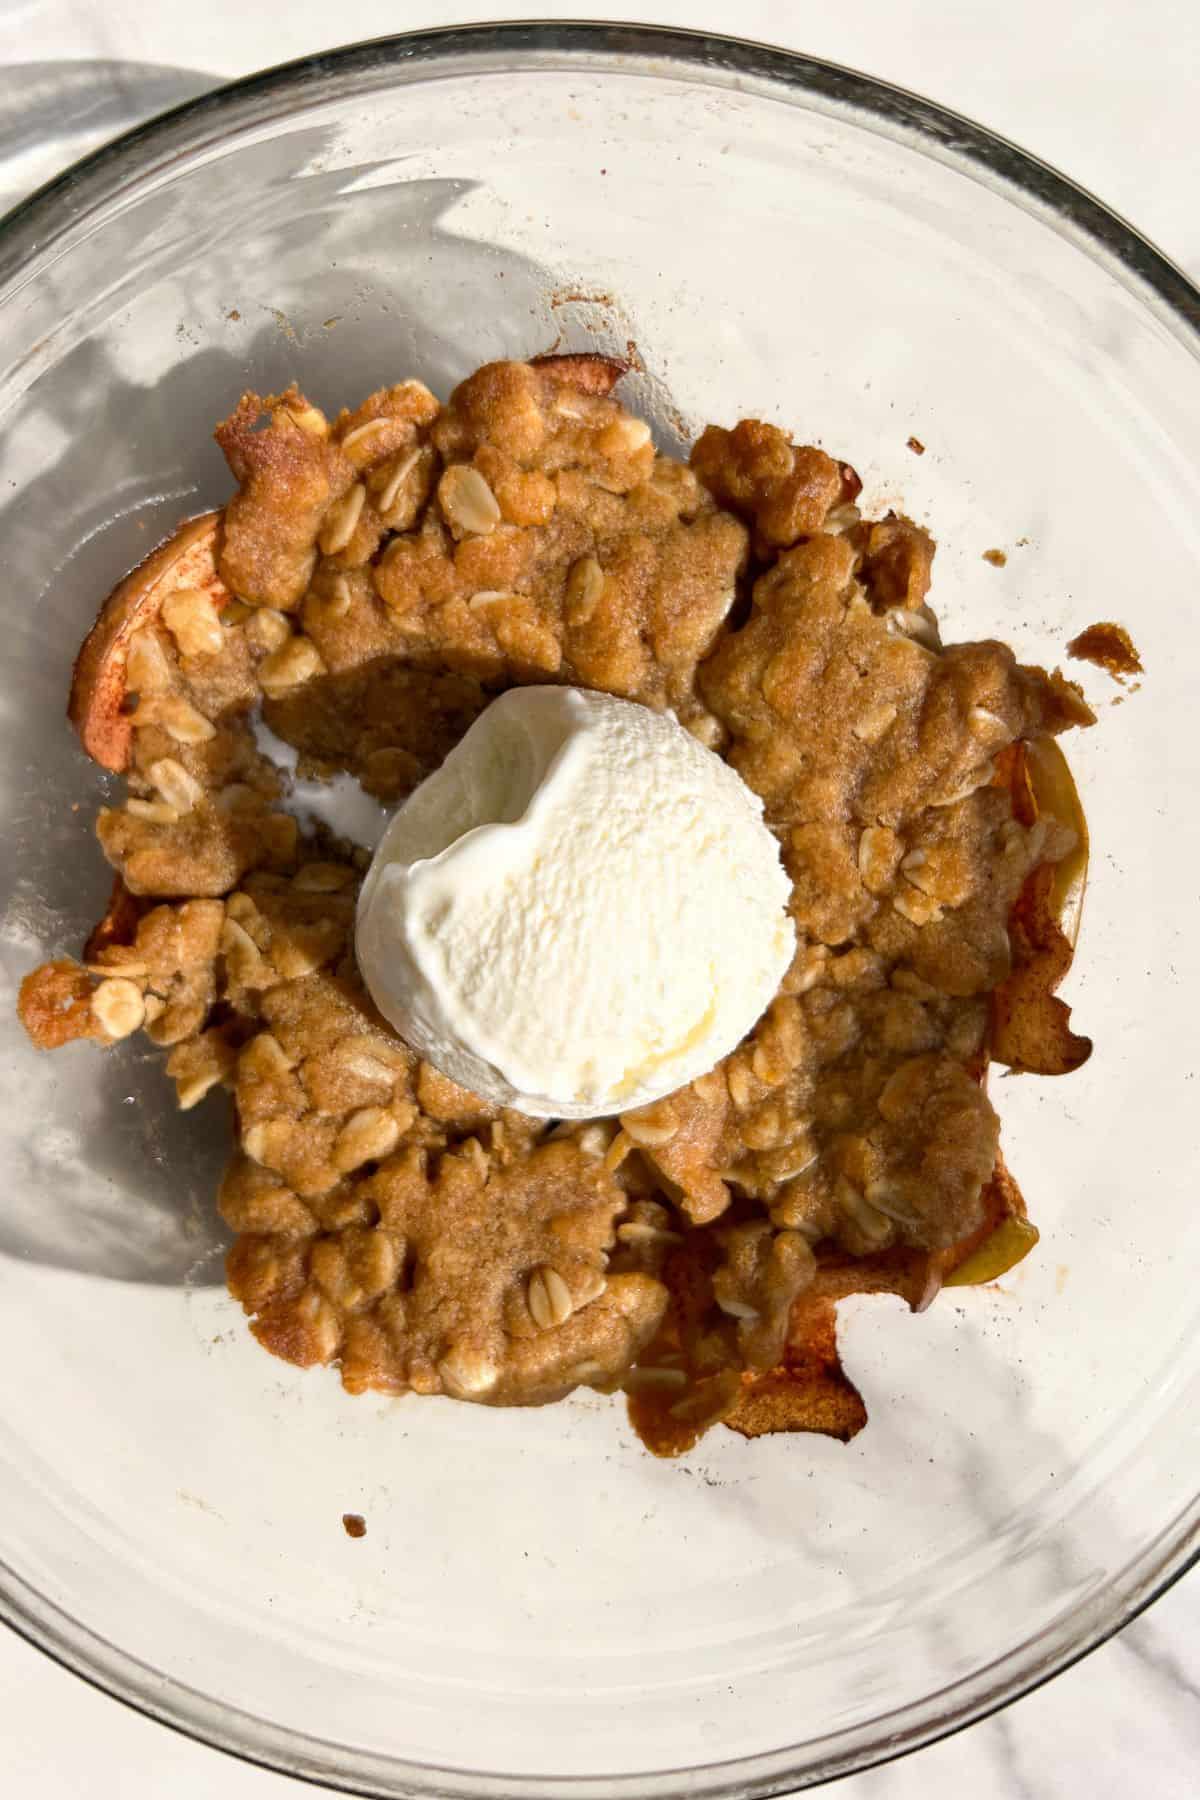 Baked apple crumble for two topped with vanilla ice cream.